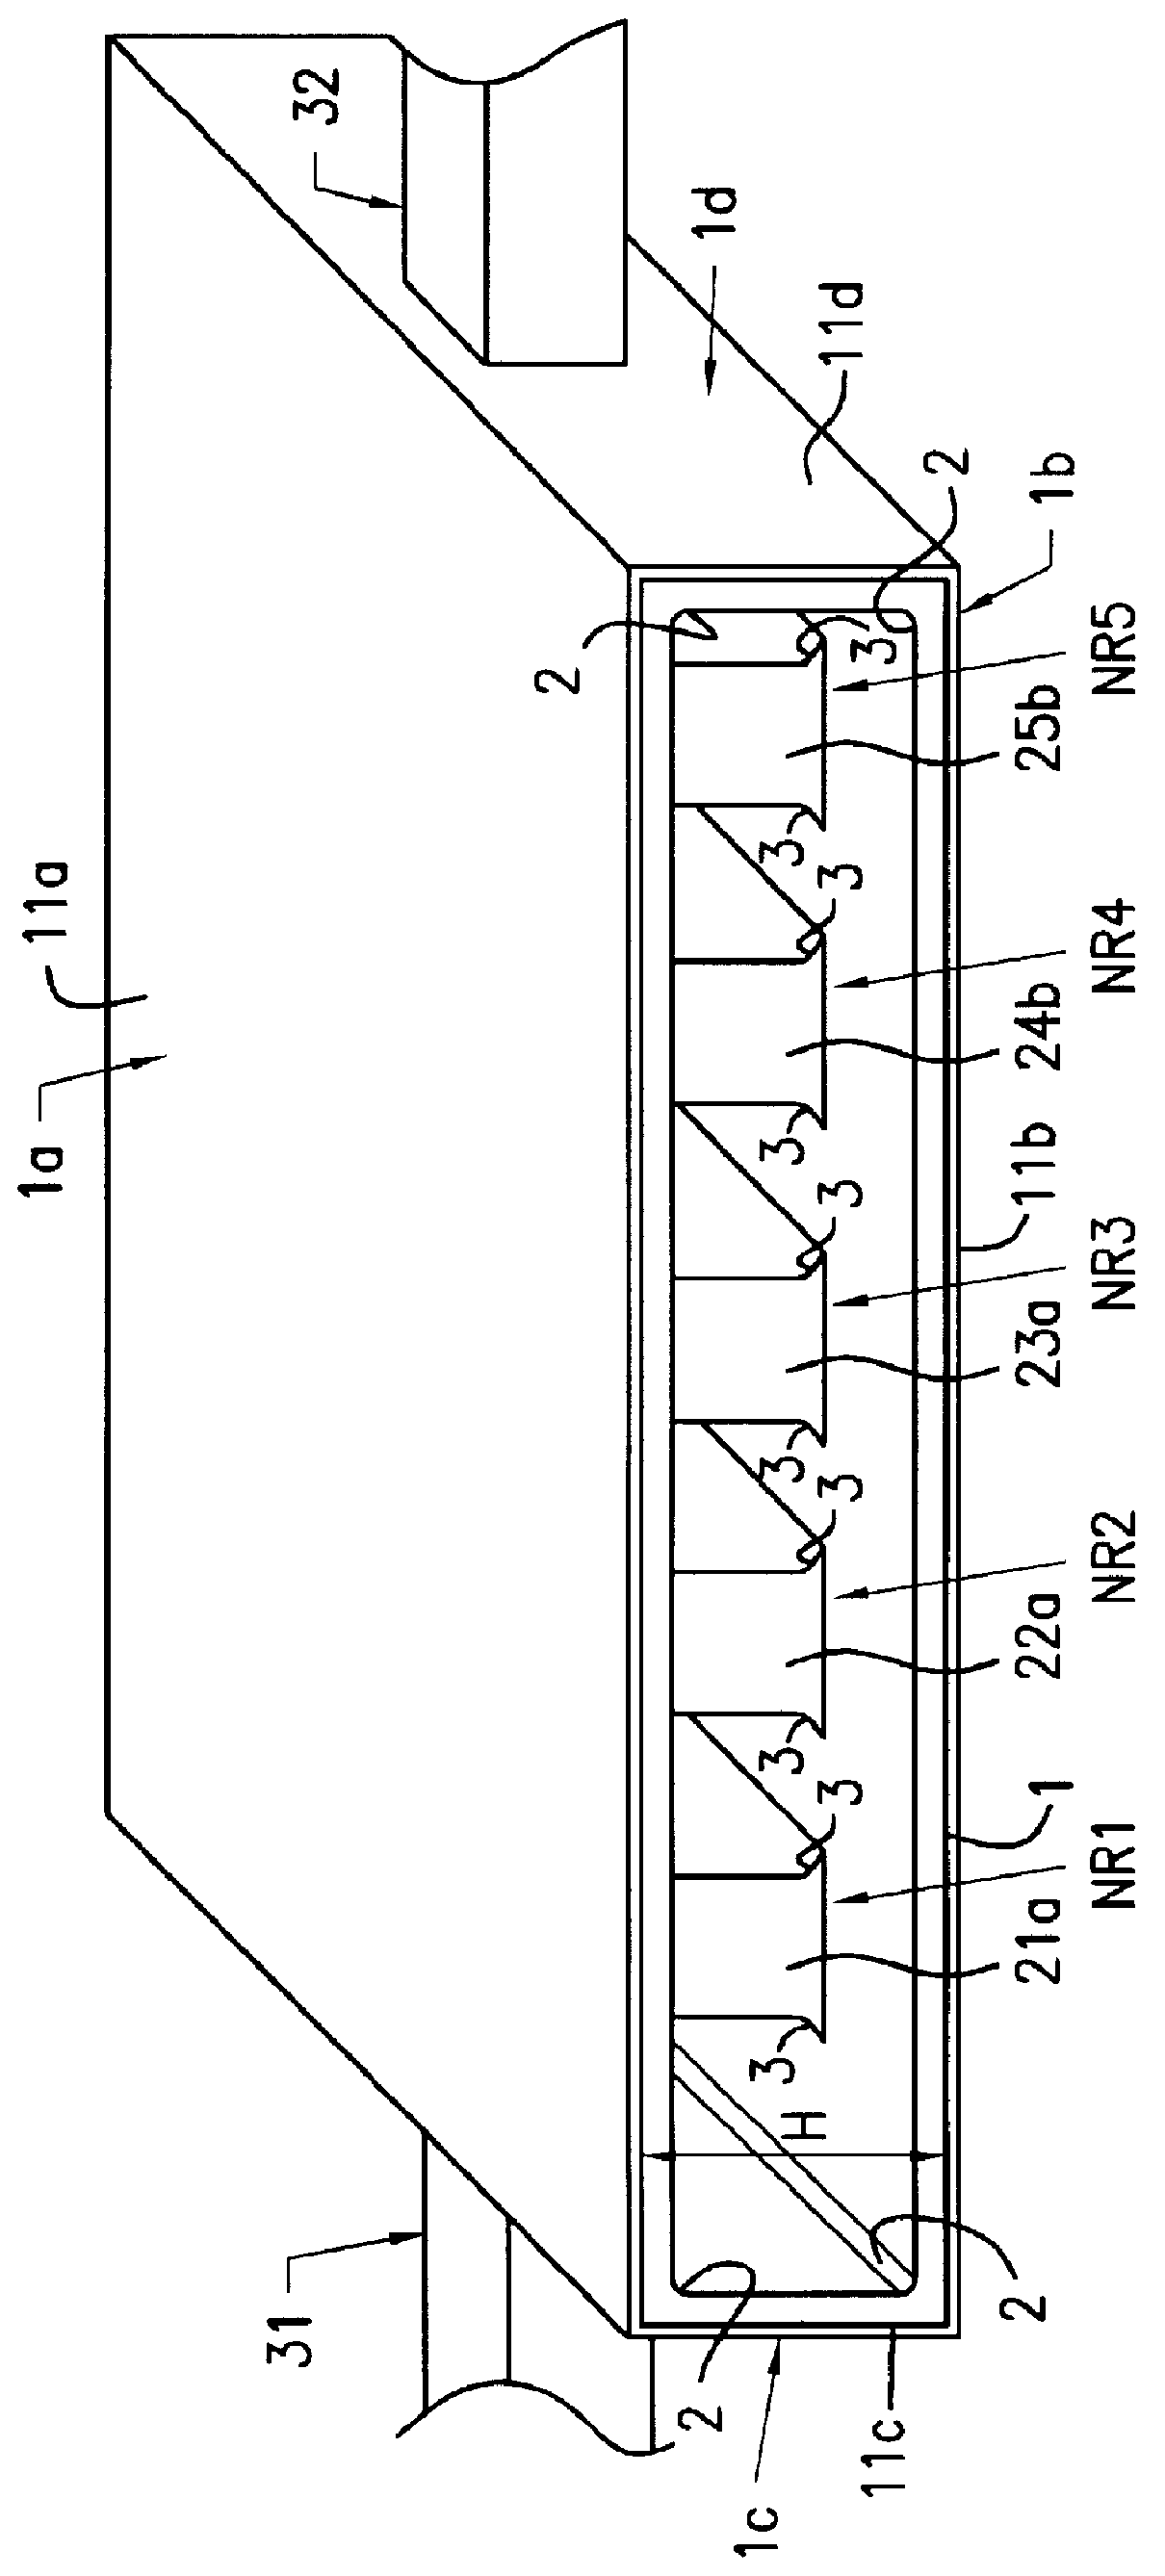 Band-pass filter apparatus using superconducting integrated nonradiative dielectric waveguide